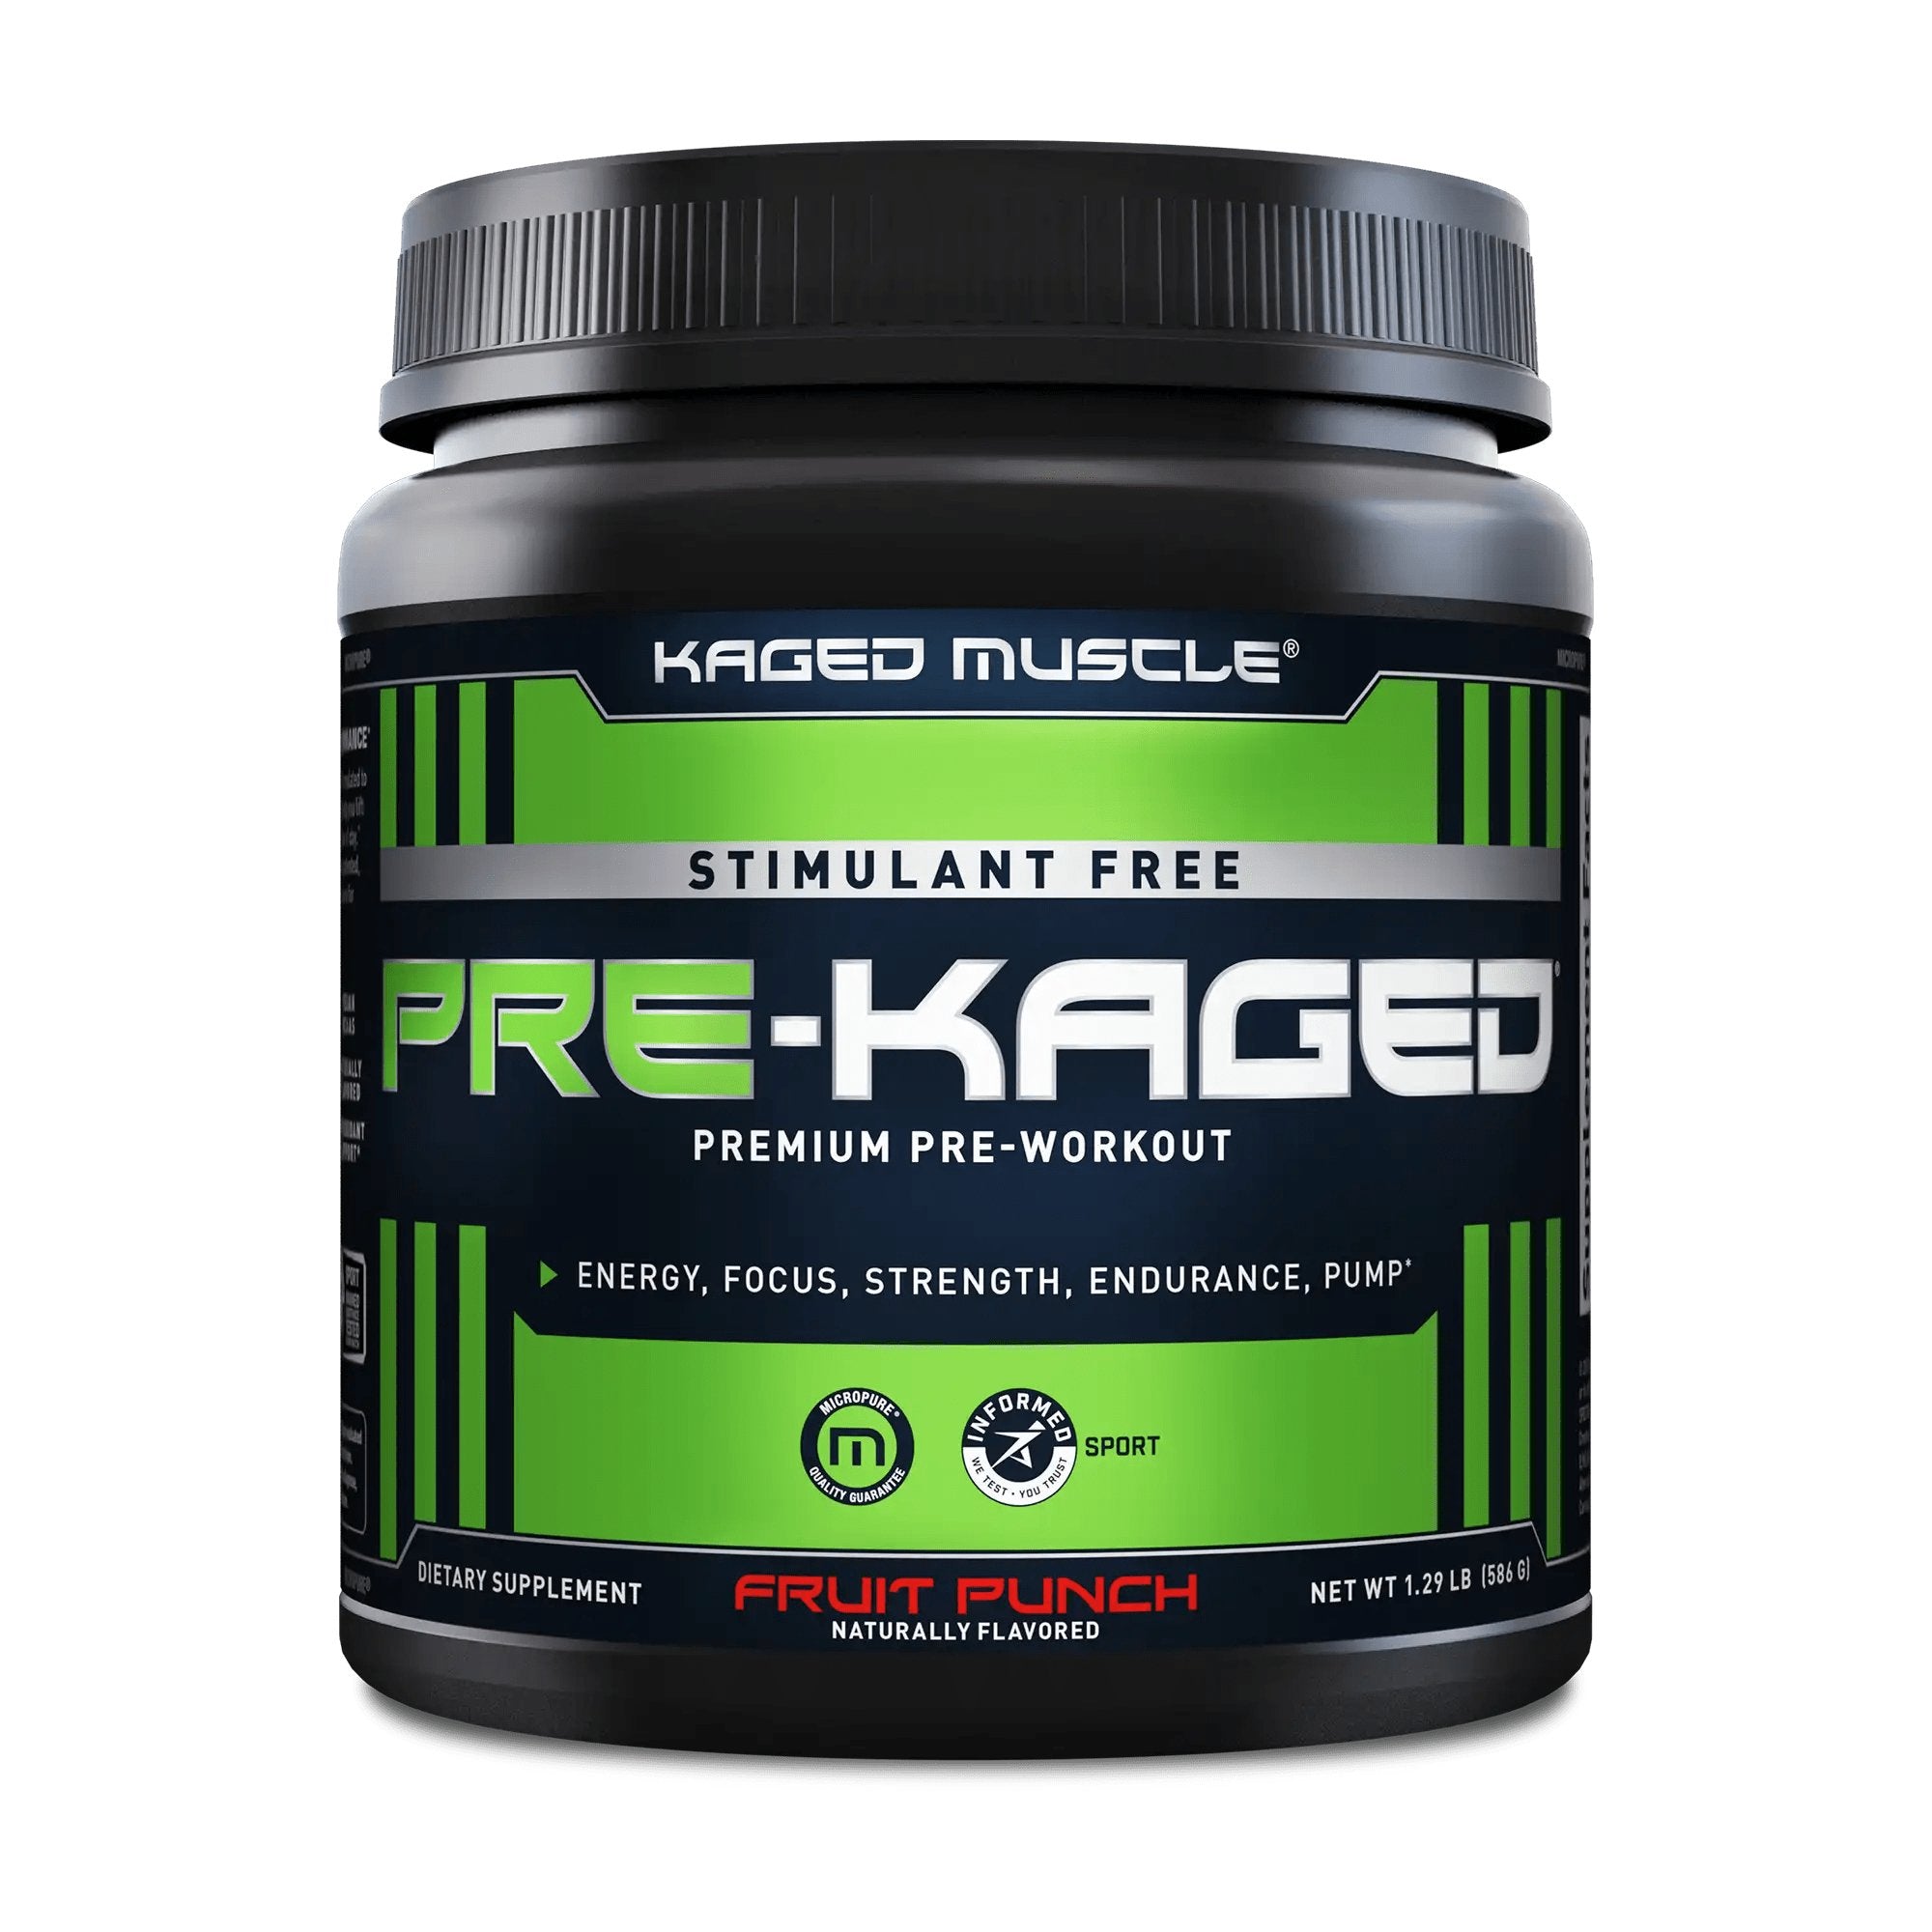 Kaged MusclePre-Kaged Stim FreePre-WorkoutRED SUPPS